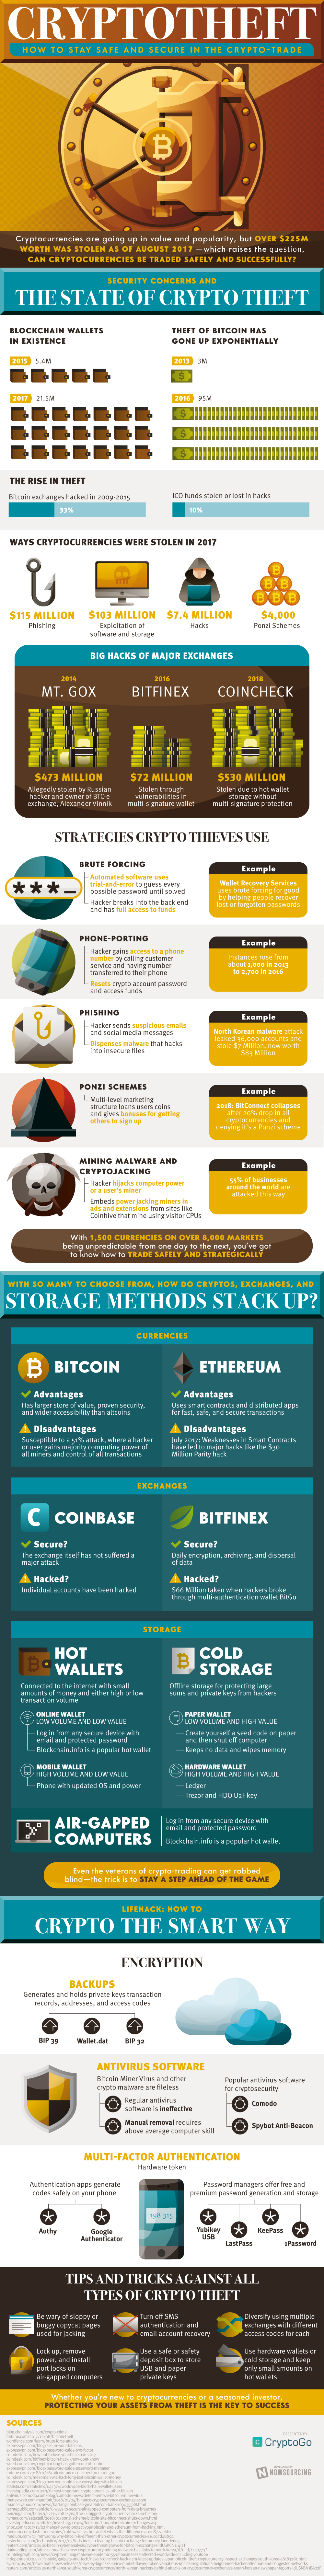 [Infographic] Crypto-theft: Safety and security in the crypto-trade